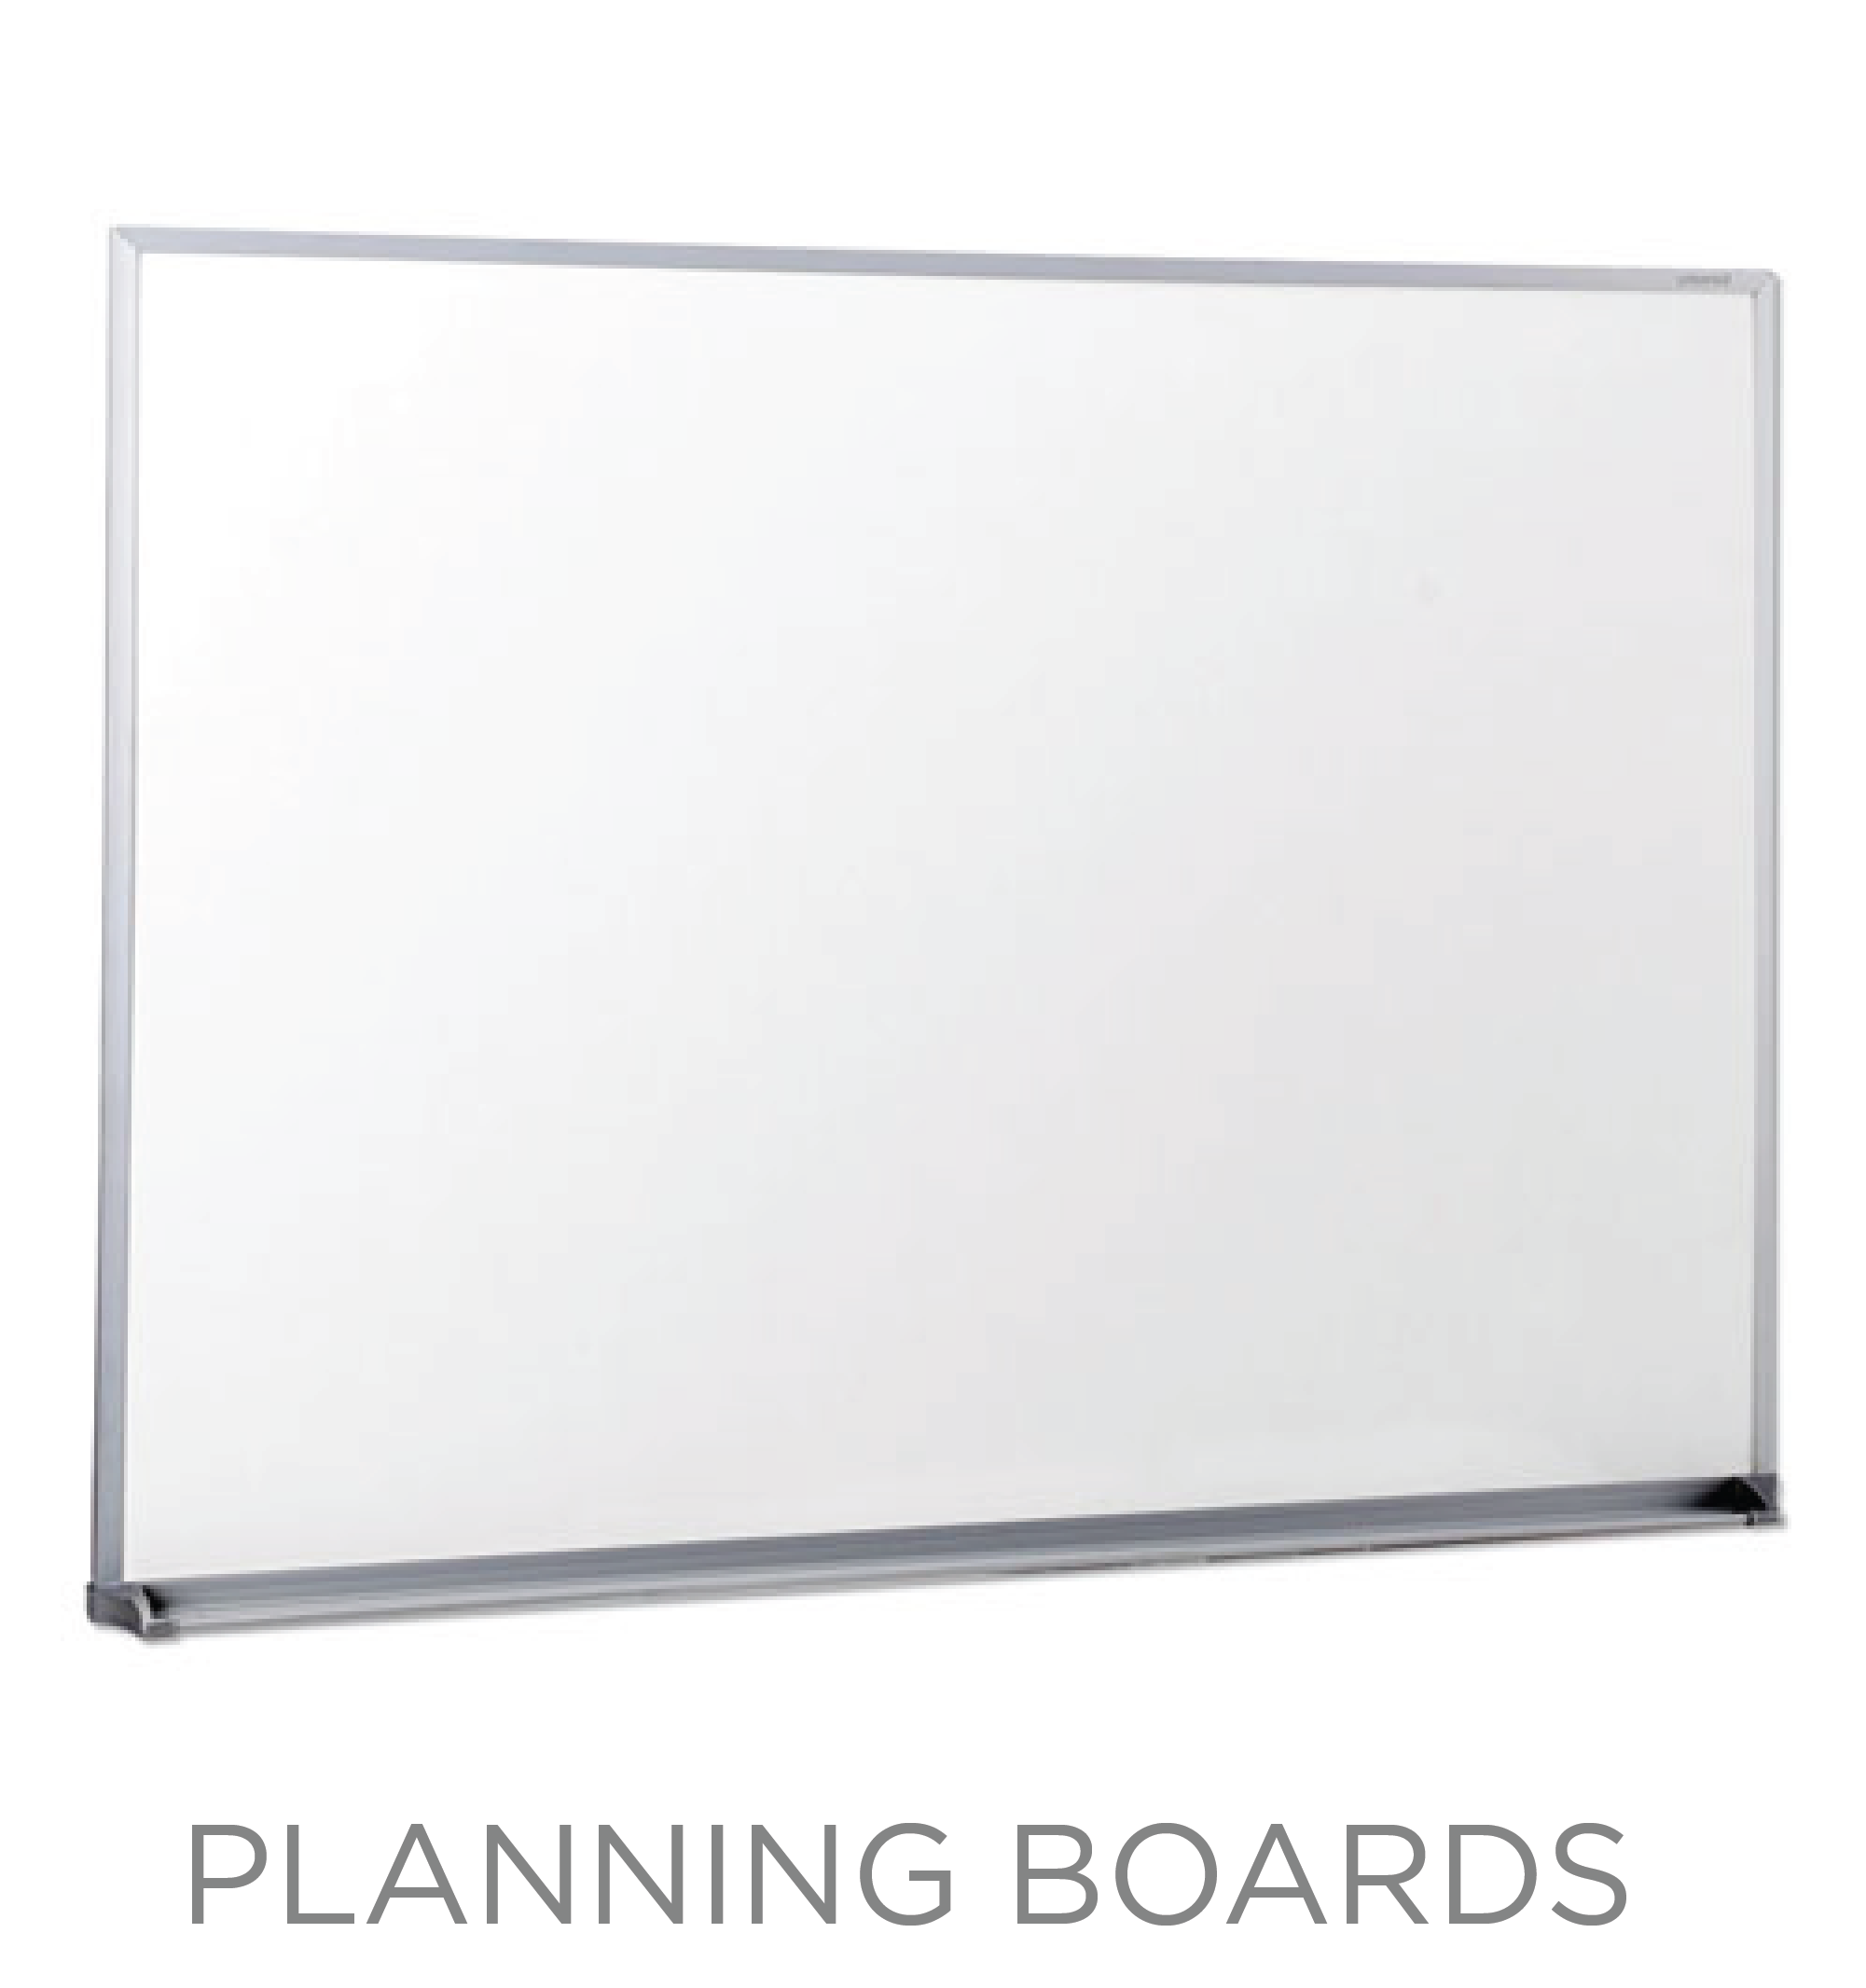 Planning Boards - Preparing for the Holidays